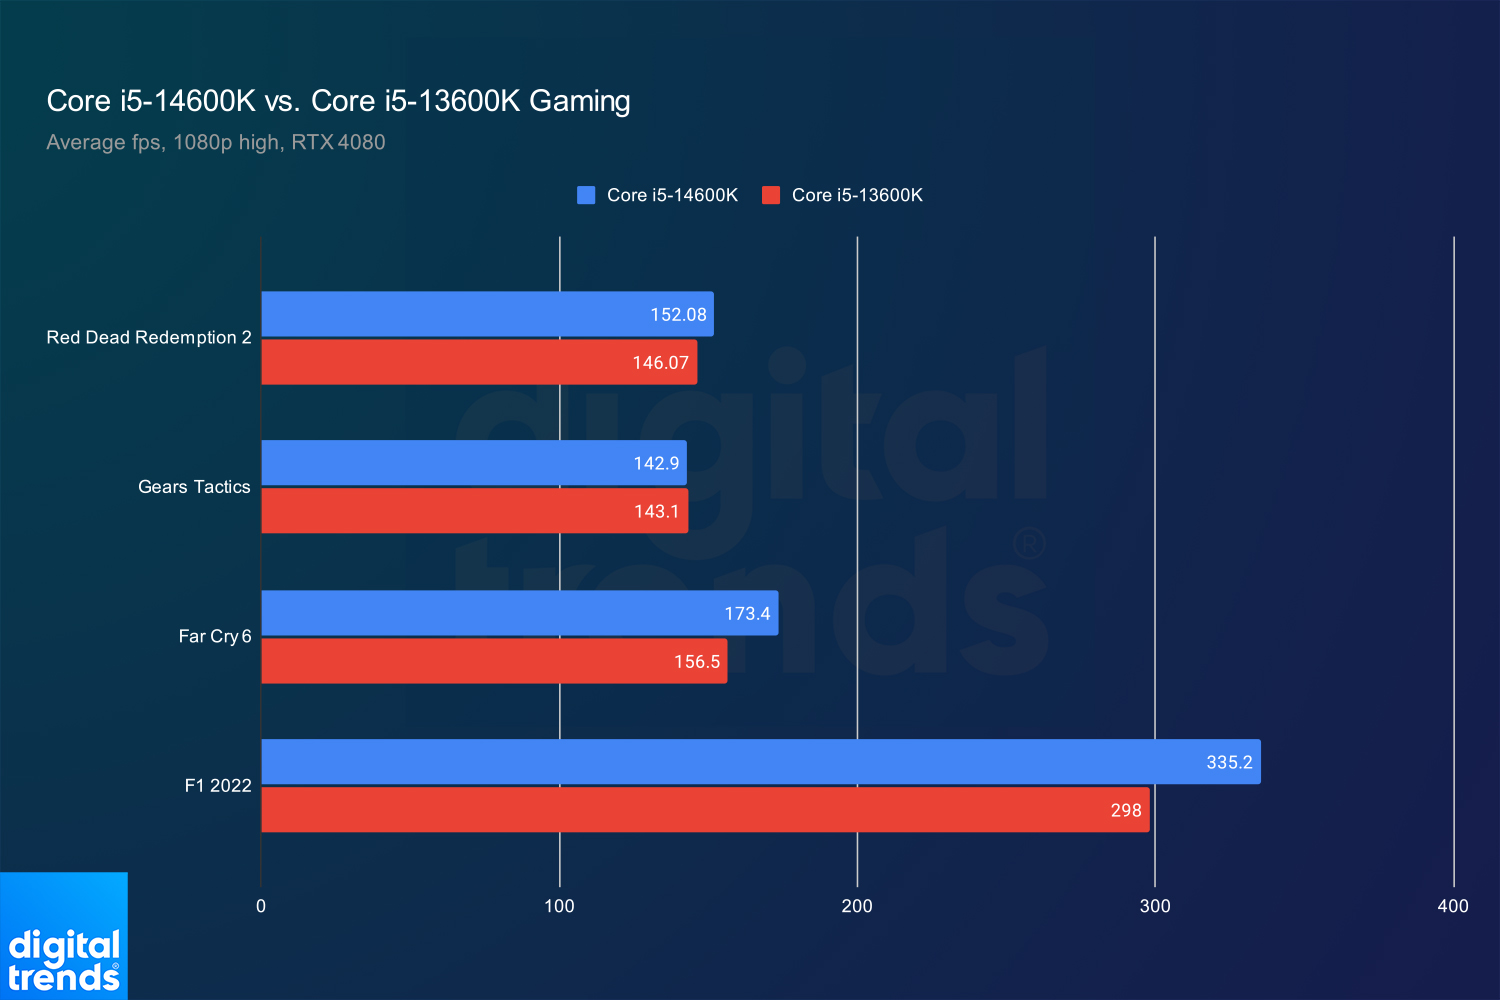 Intel Core i5-14600KF is 5.5% faster than i5-13600K in first